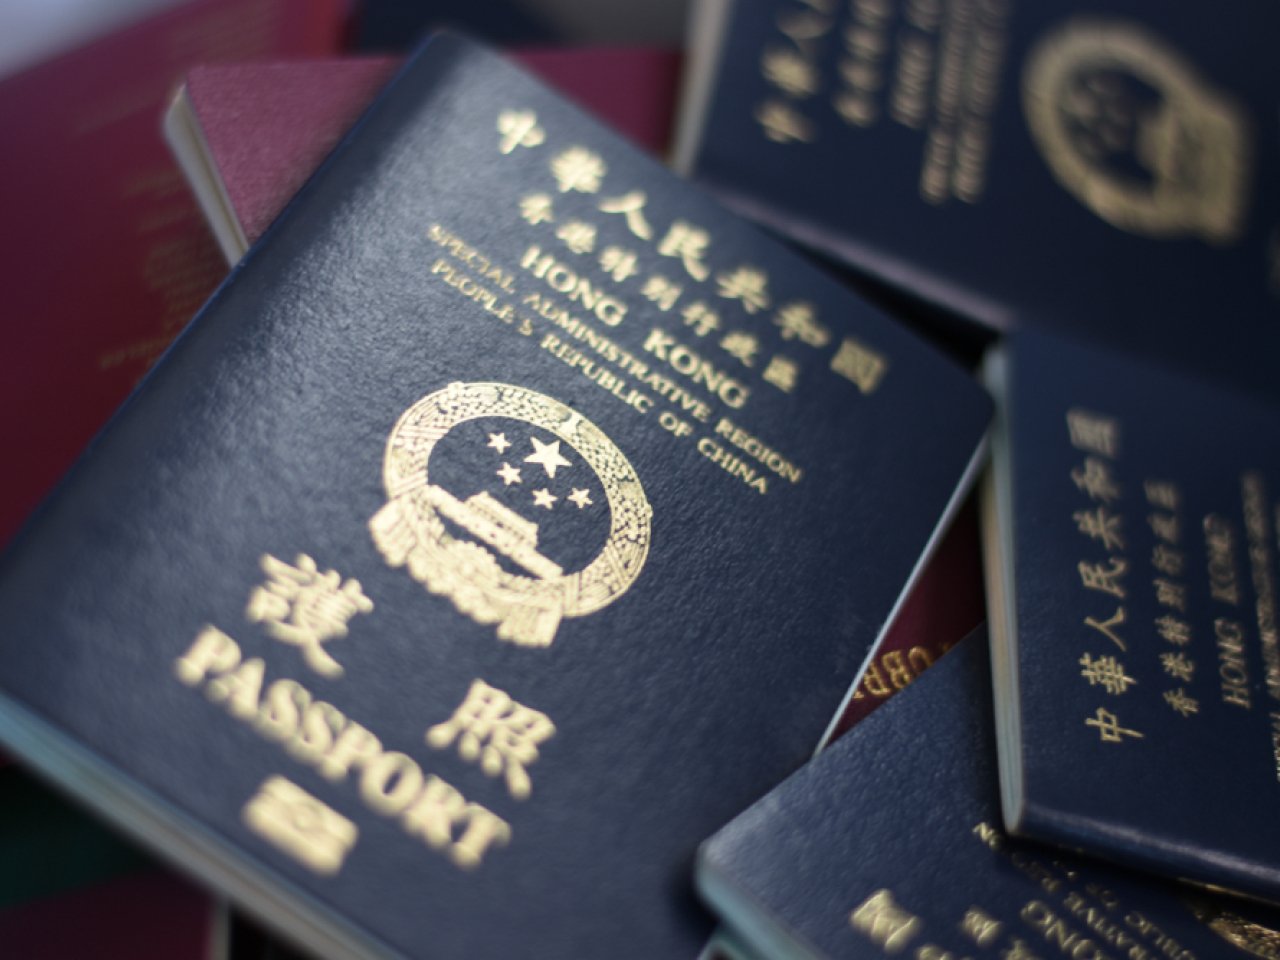 Thailand visa-free period for HKers extended